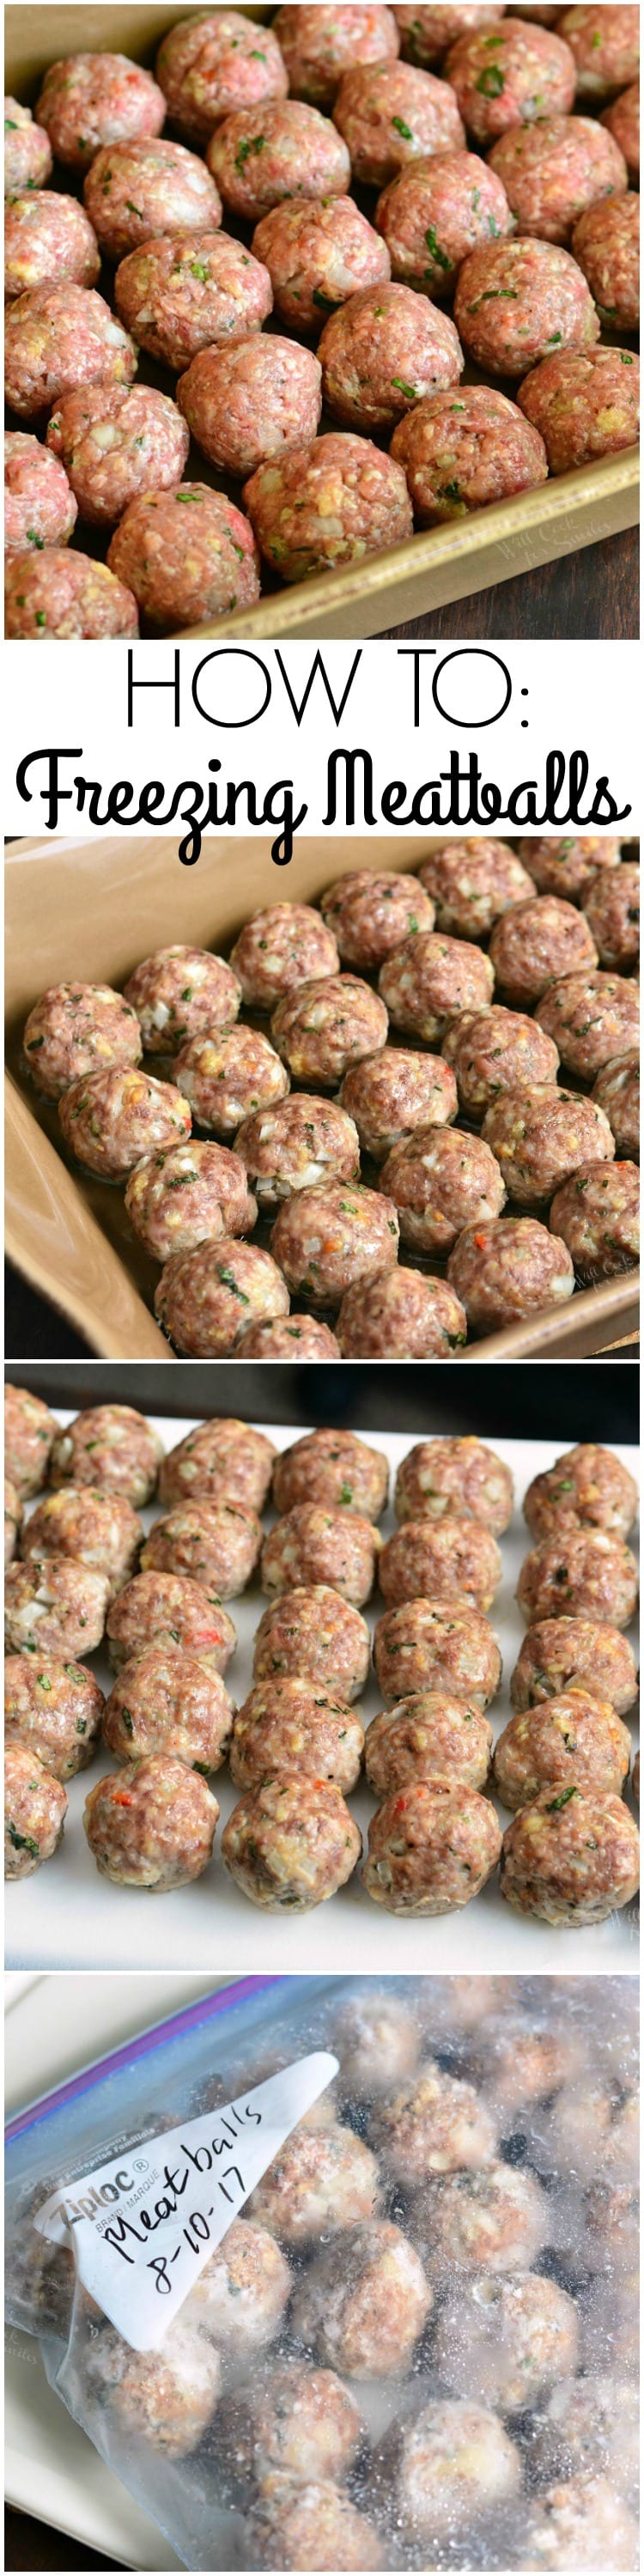 collage 1st picture is Meatballs in tan casserole dish uncooked, 2nd is meatballs in tan casserole dish cooked, 3rd is cooked meatballs on wax paper, 4th is meatballs in a freezer bag 